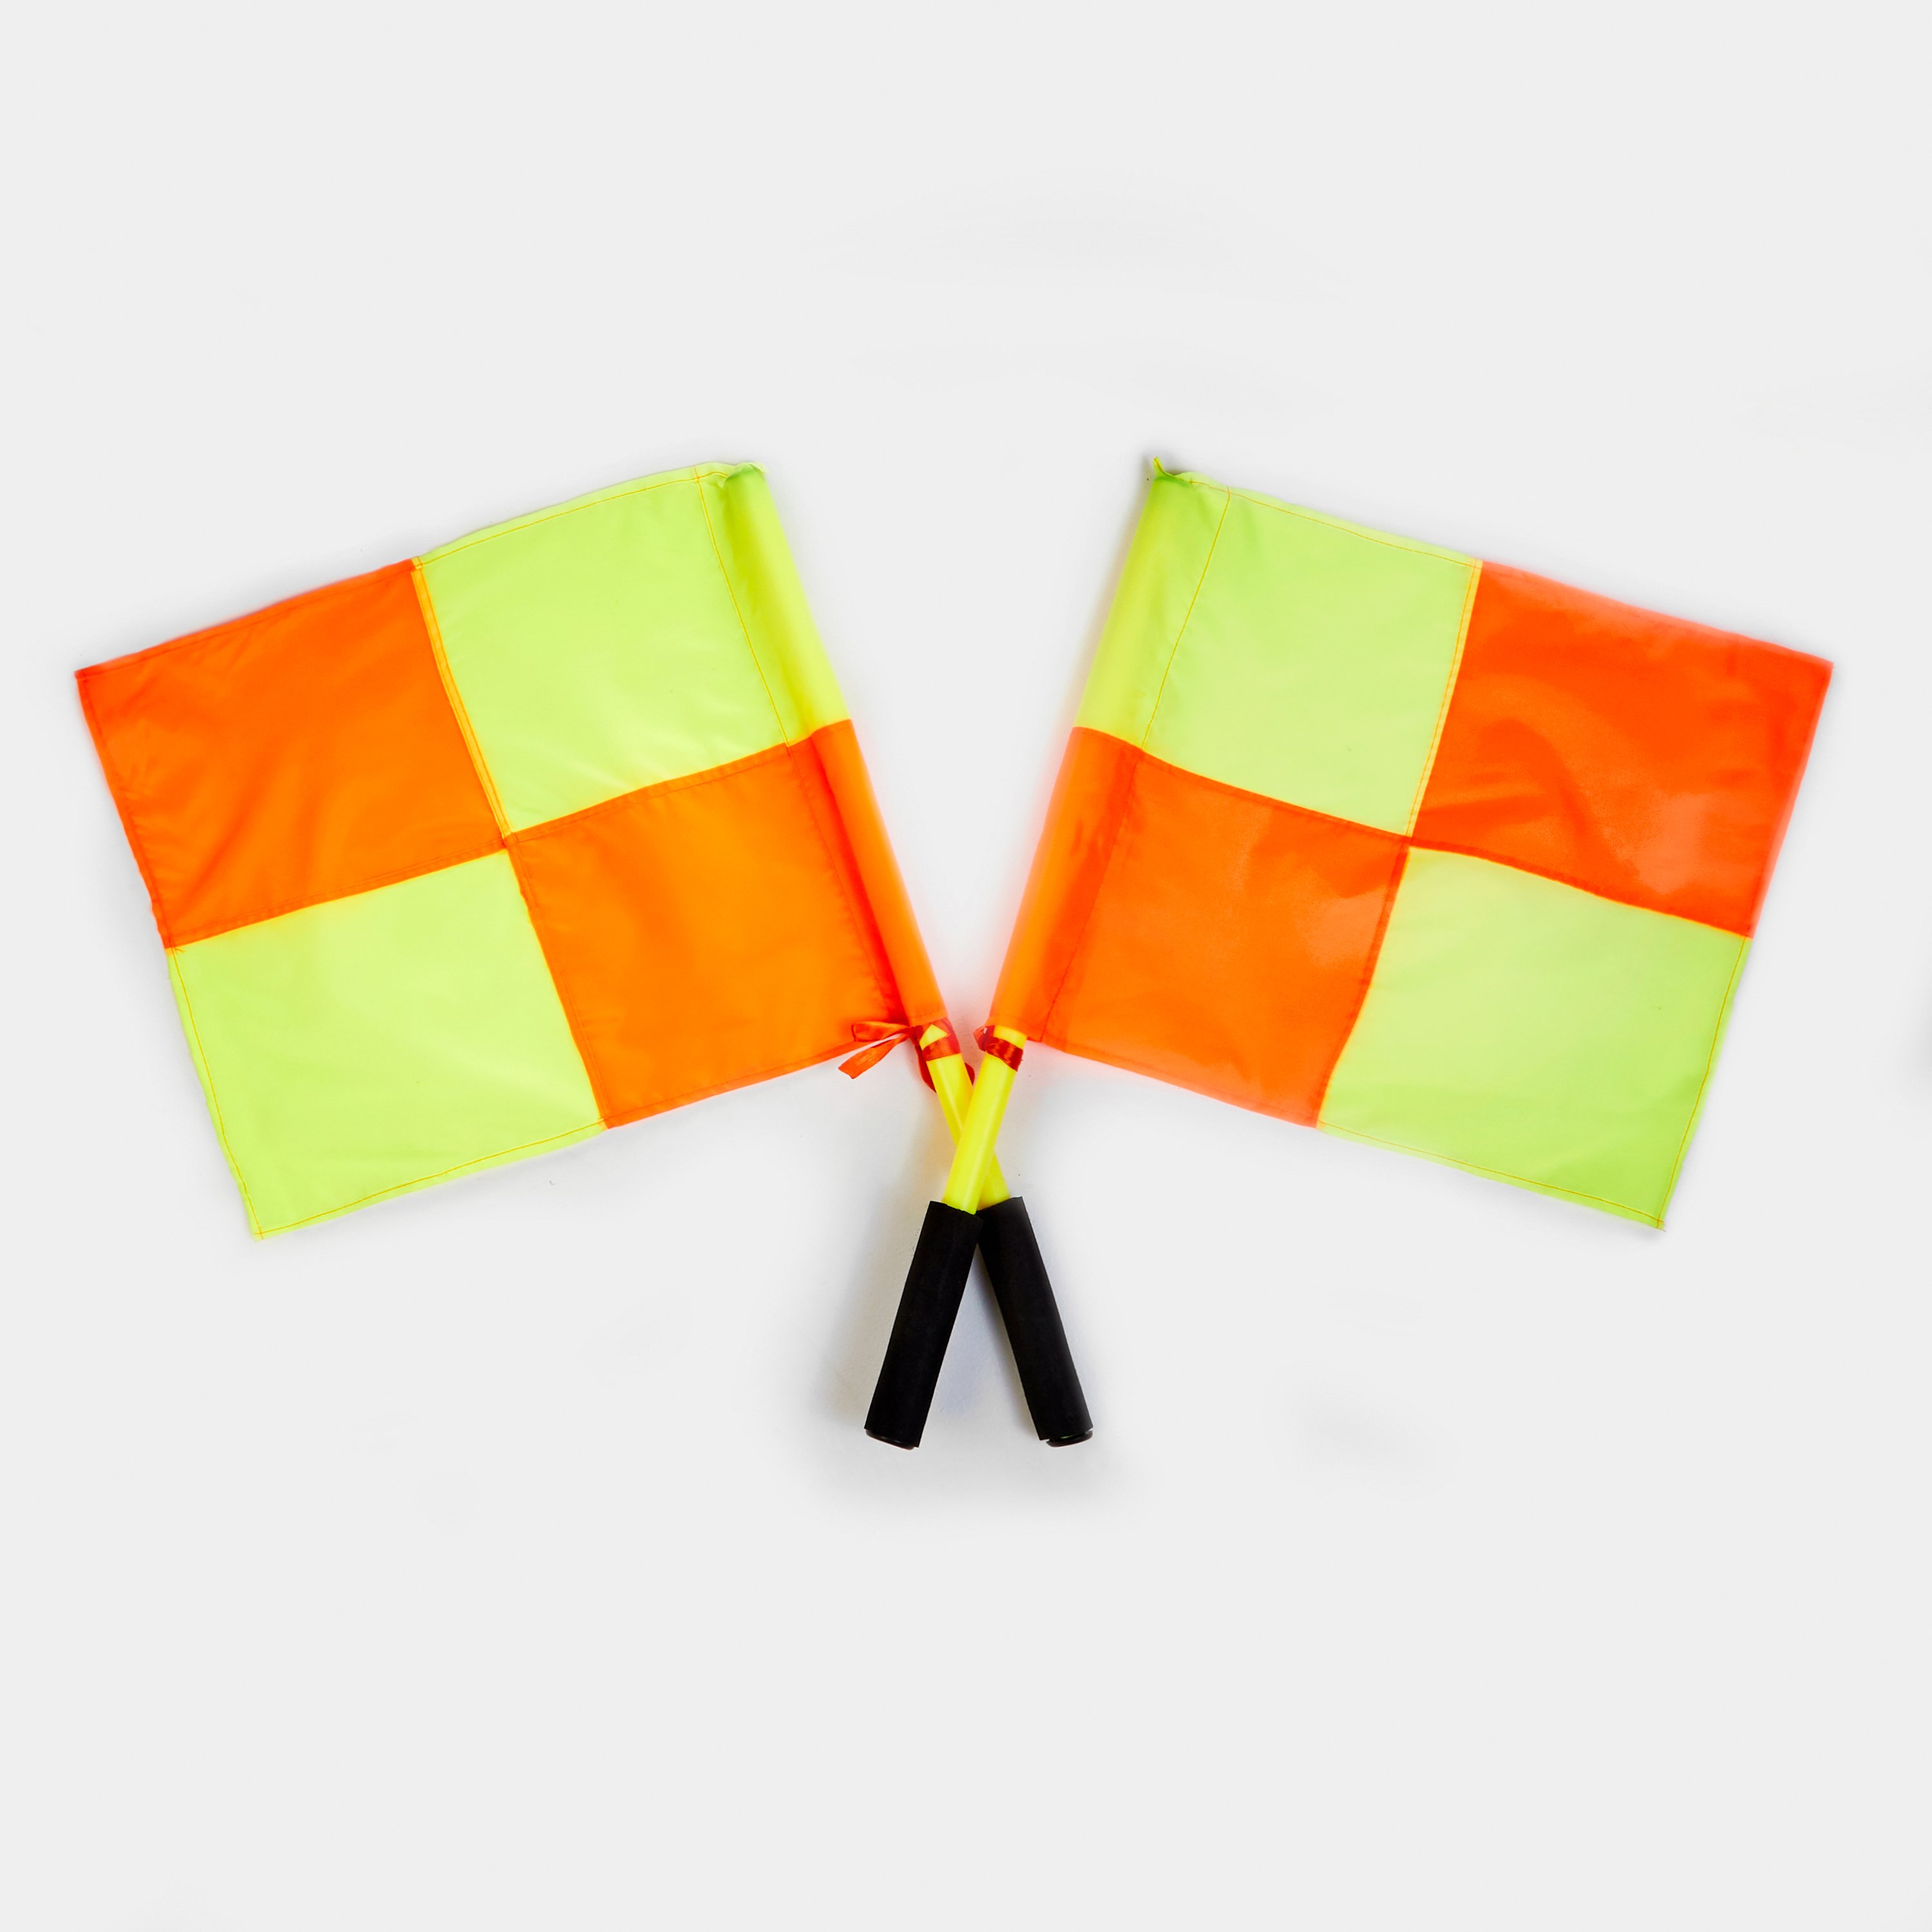 Whistles and Flags